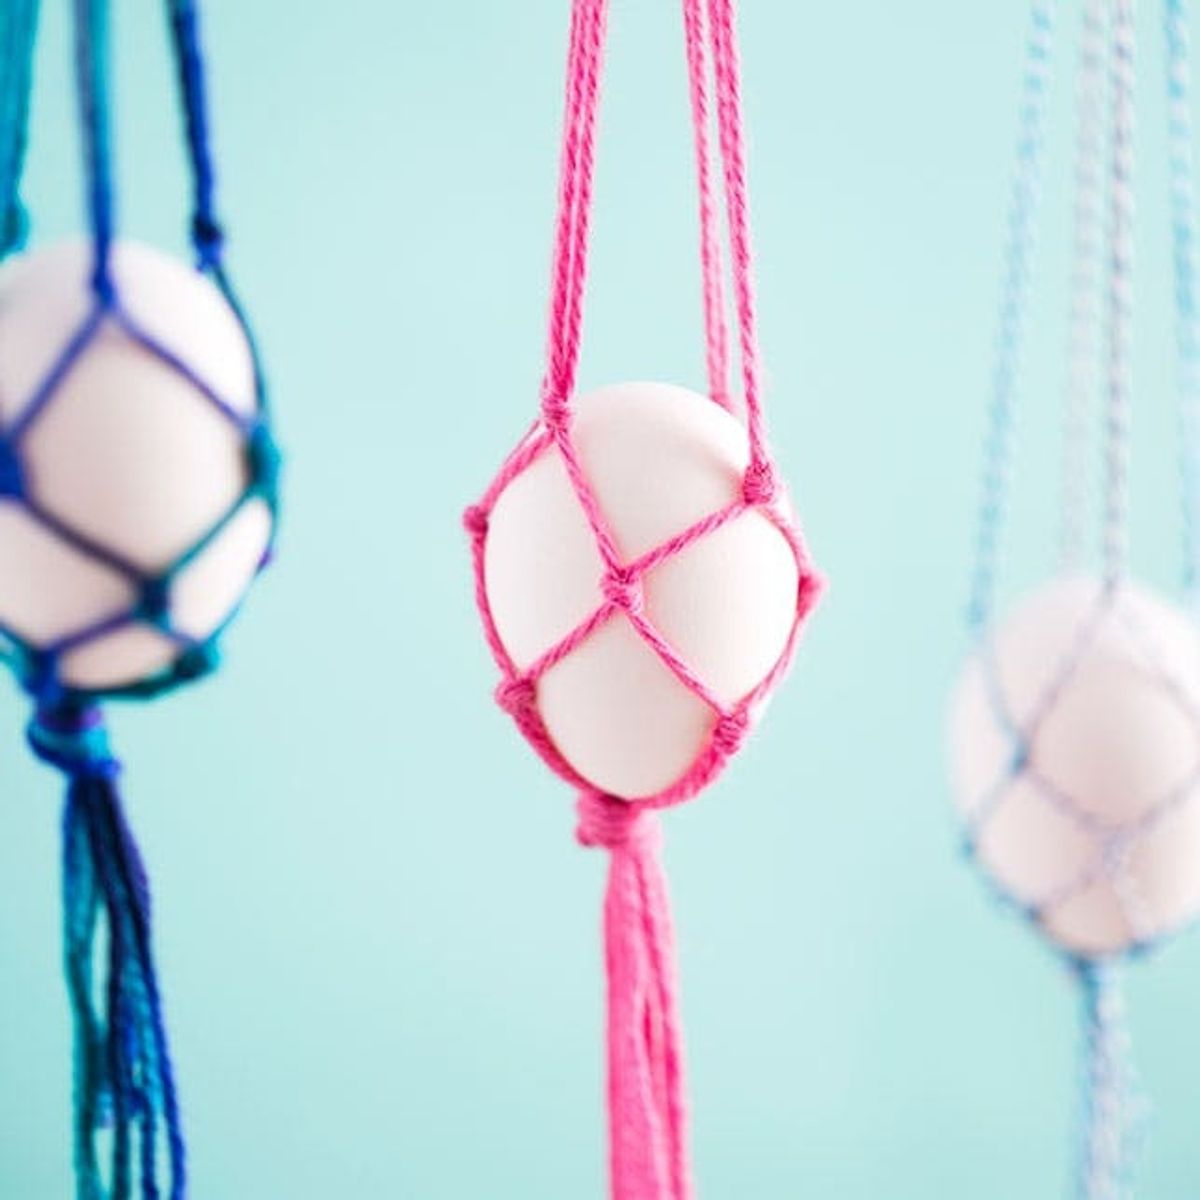 Macra-Make These Hanging Easter Egg Baskets in Just 10 Minutes